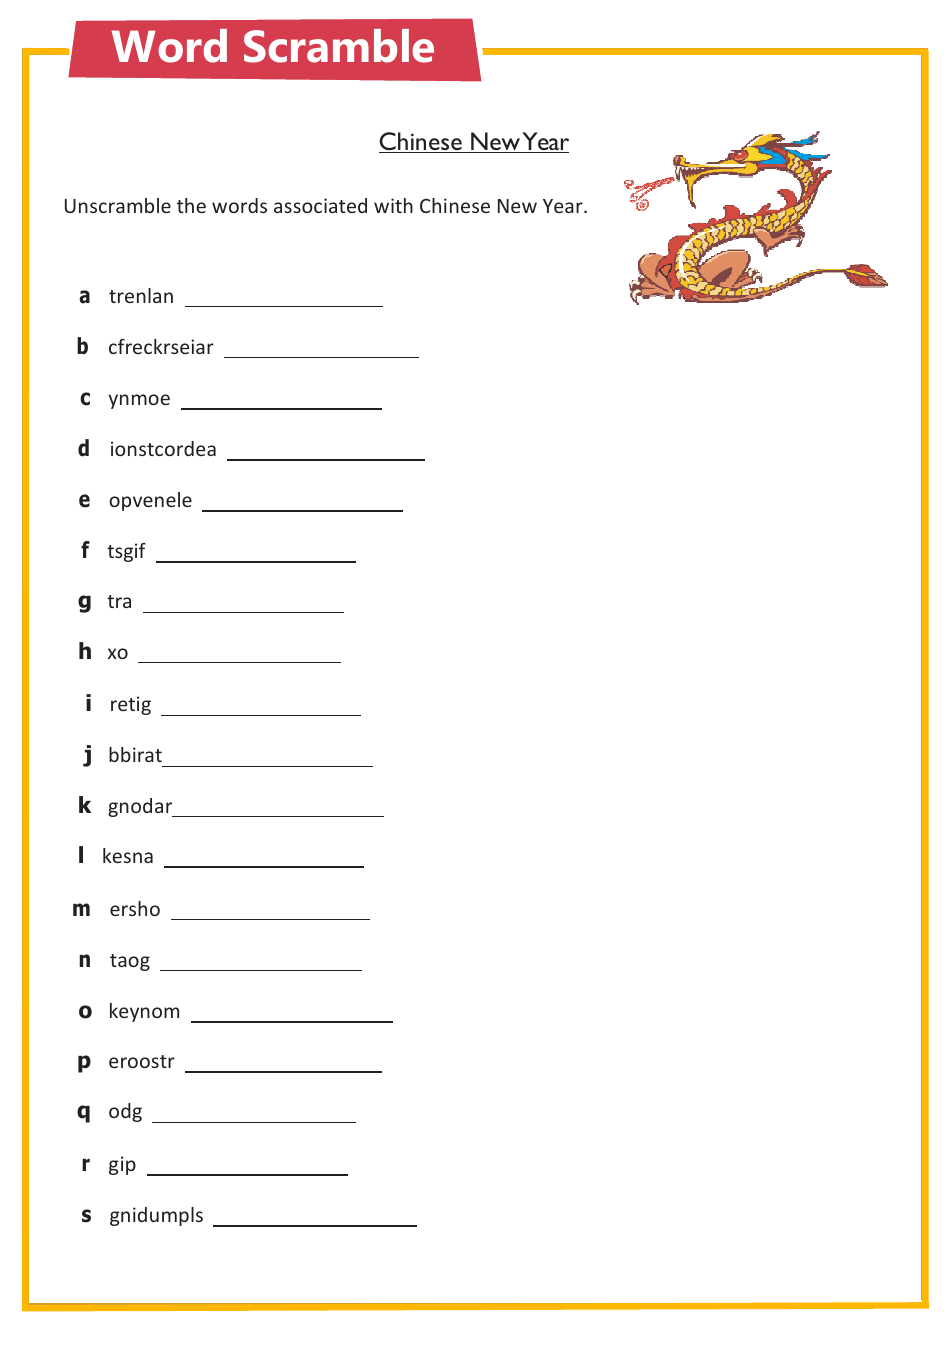 Chinese New Year Word Scramble - Fun Game for Celebrating the Lunar New Year